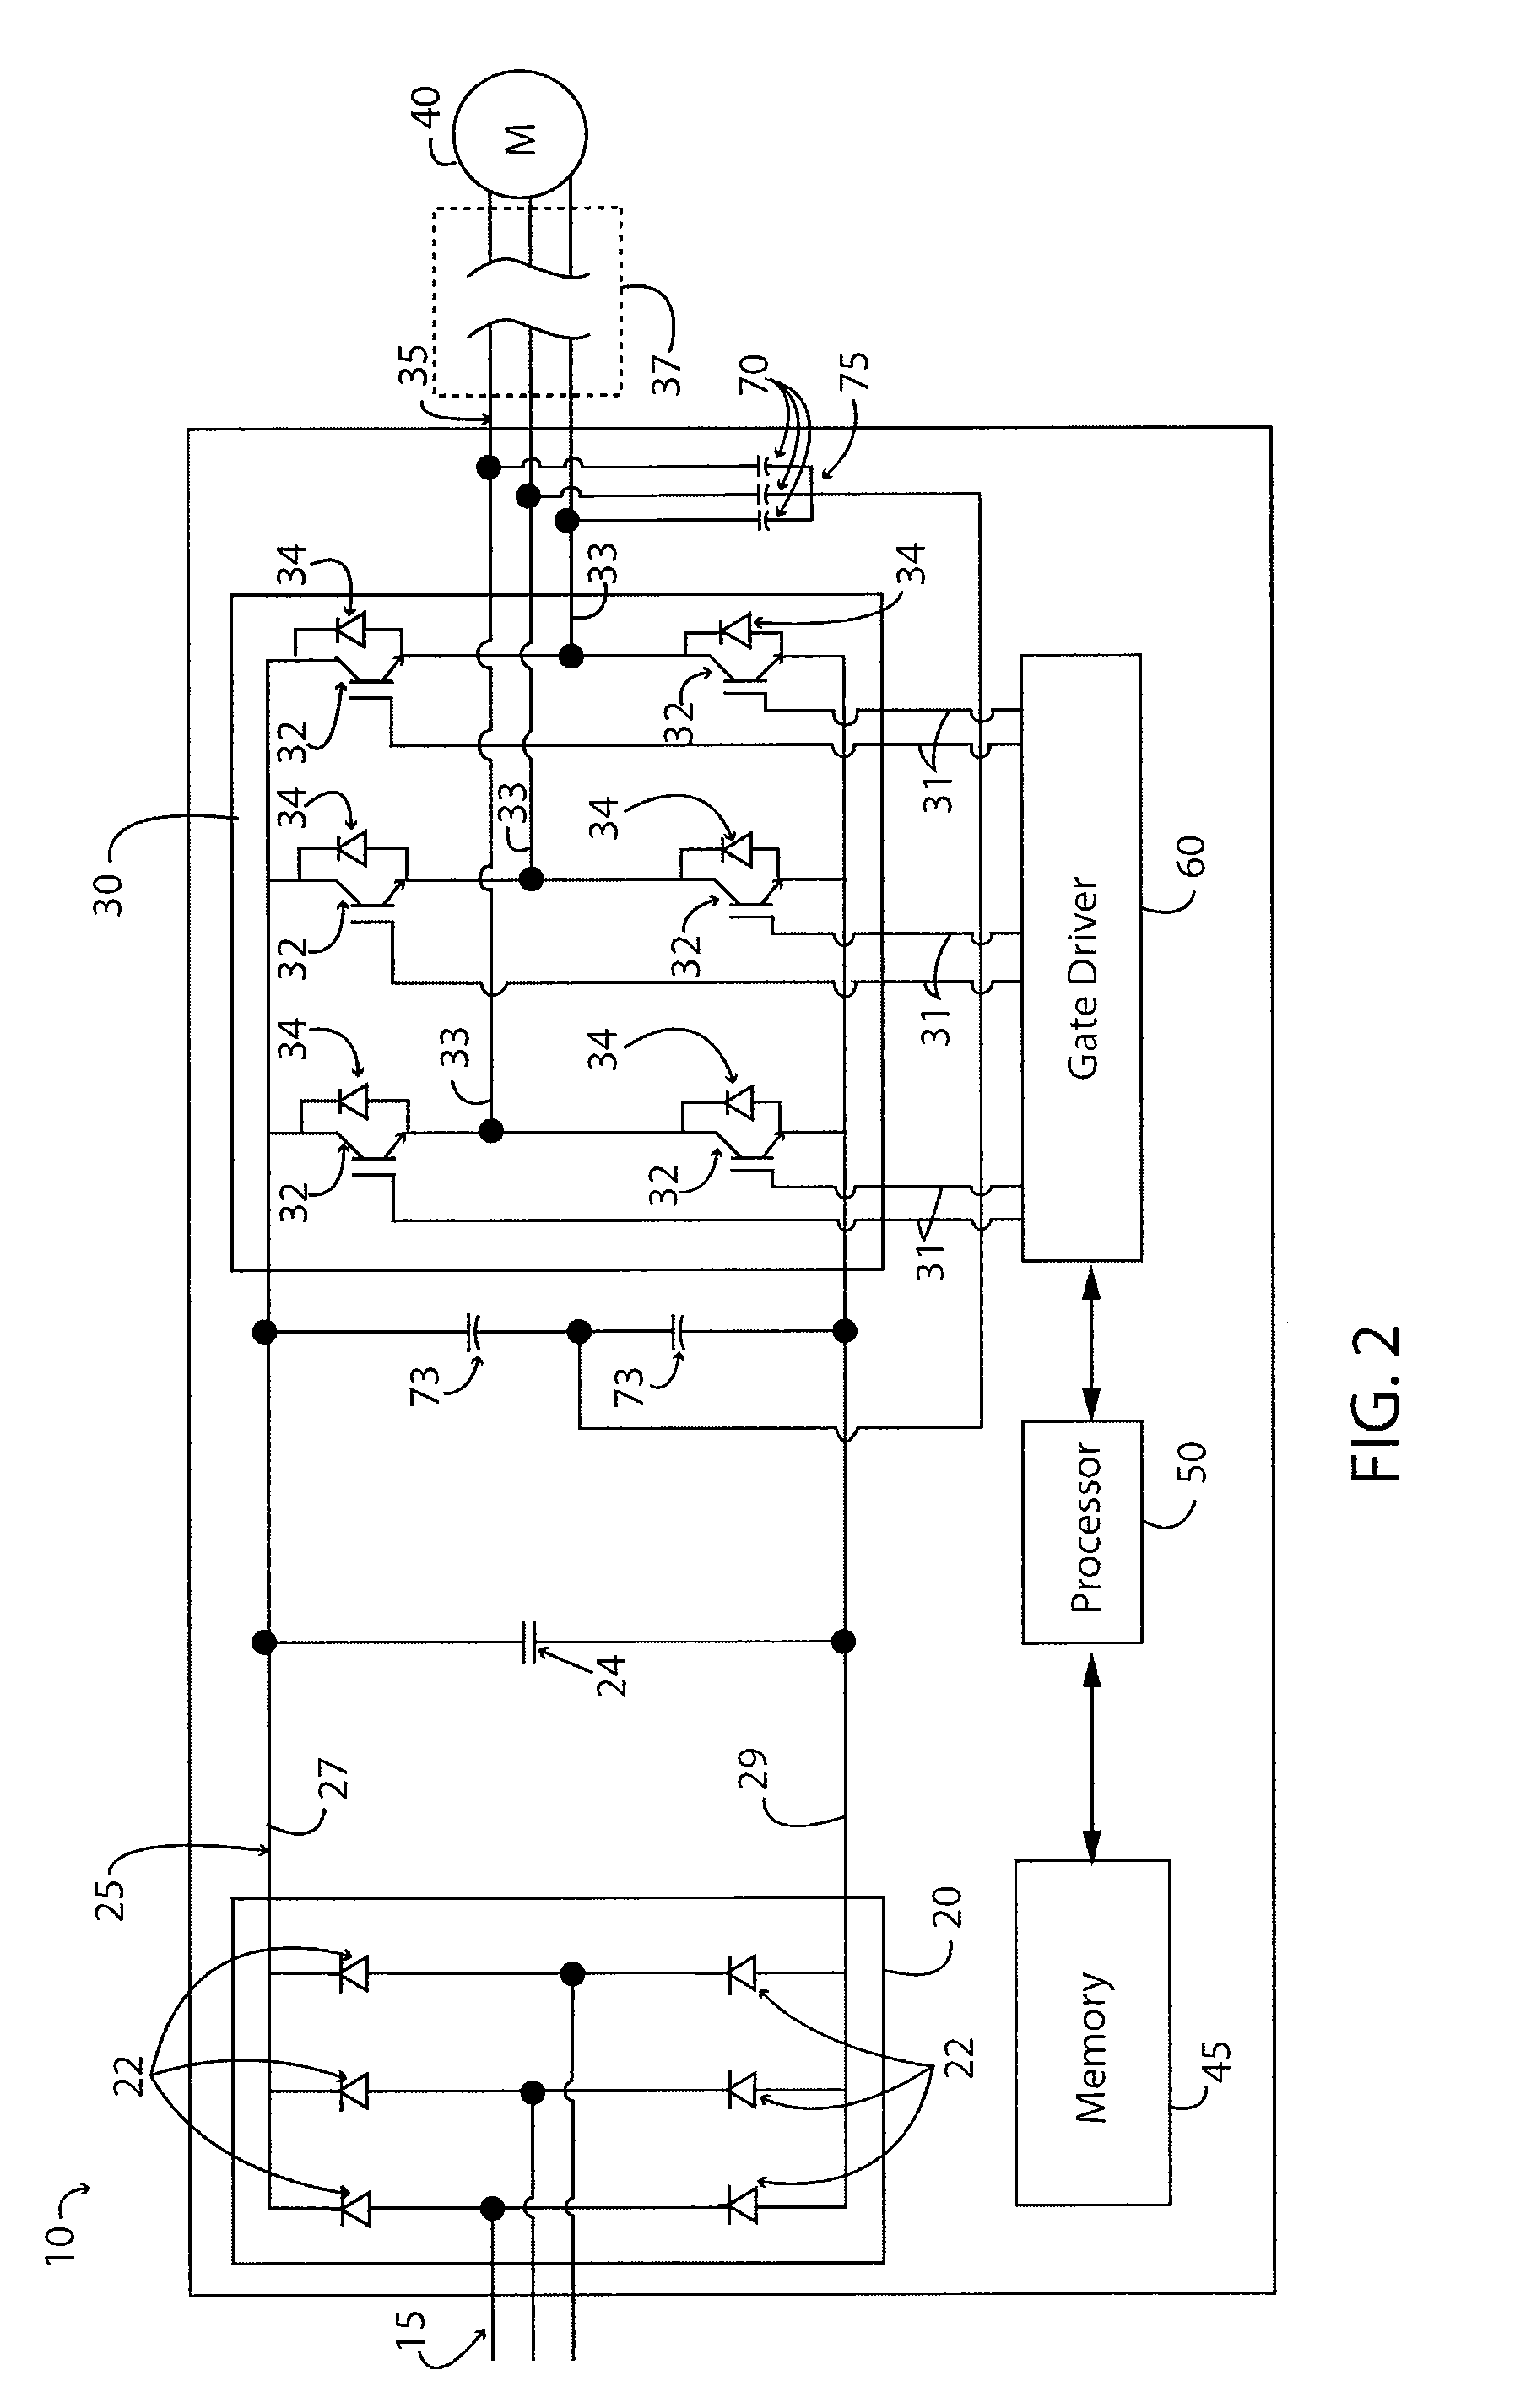 Method and Apparatus for Reducing Radiated Emissions in Switching Power Converters